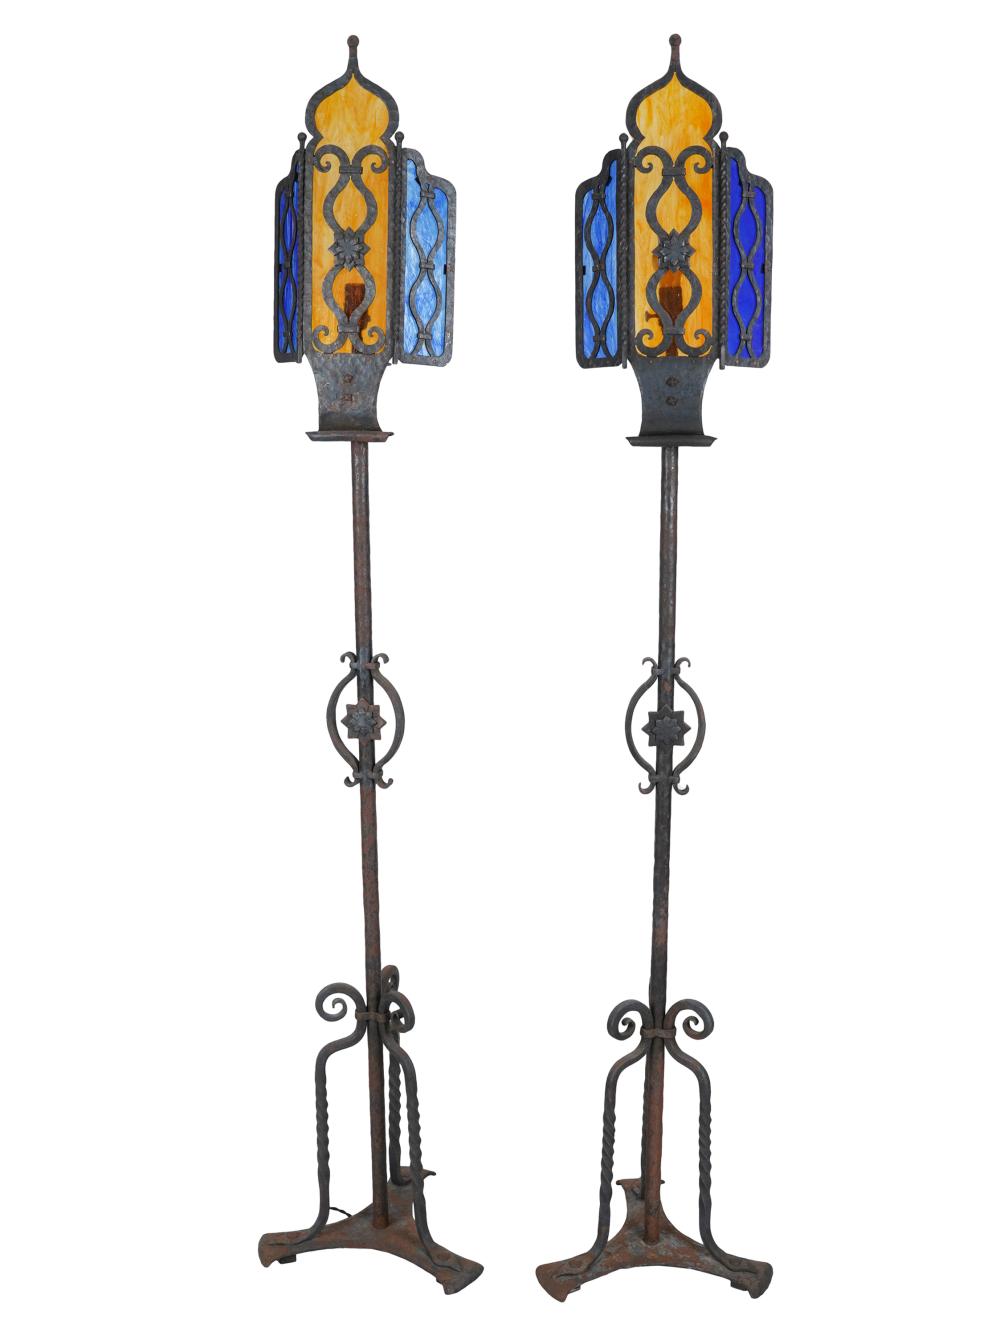 PAIR OF SPANISH REVIVAL STYLE IRON 3342d5